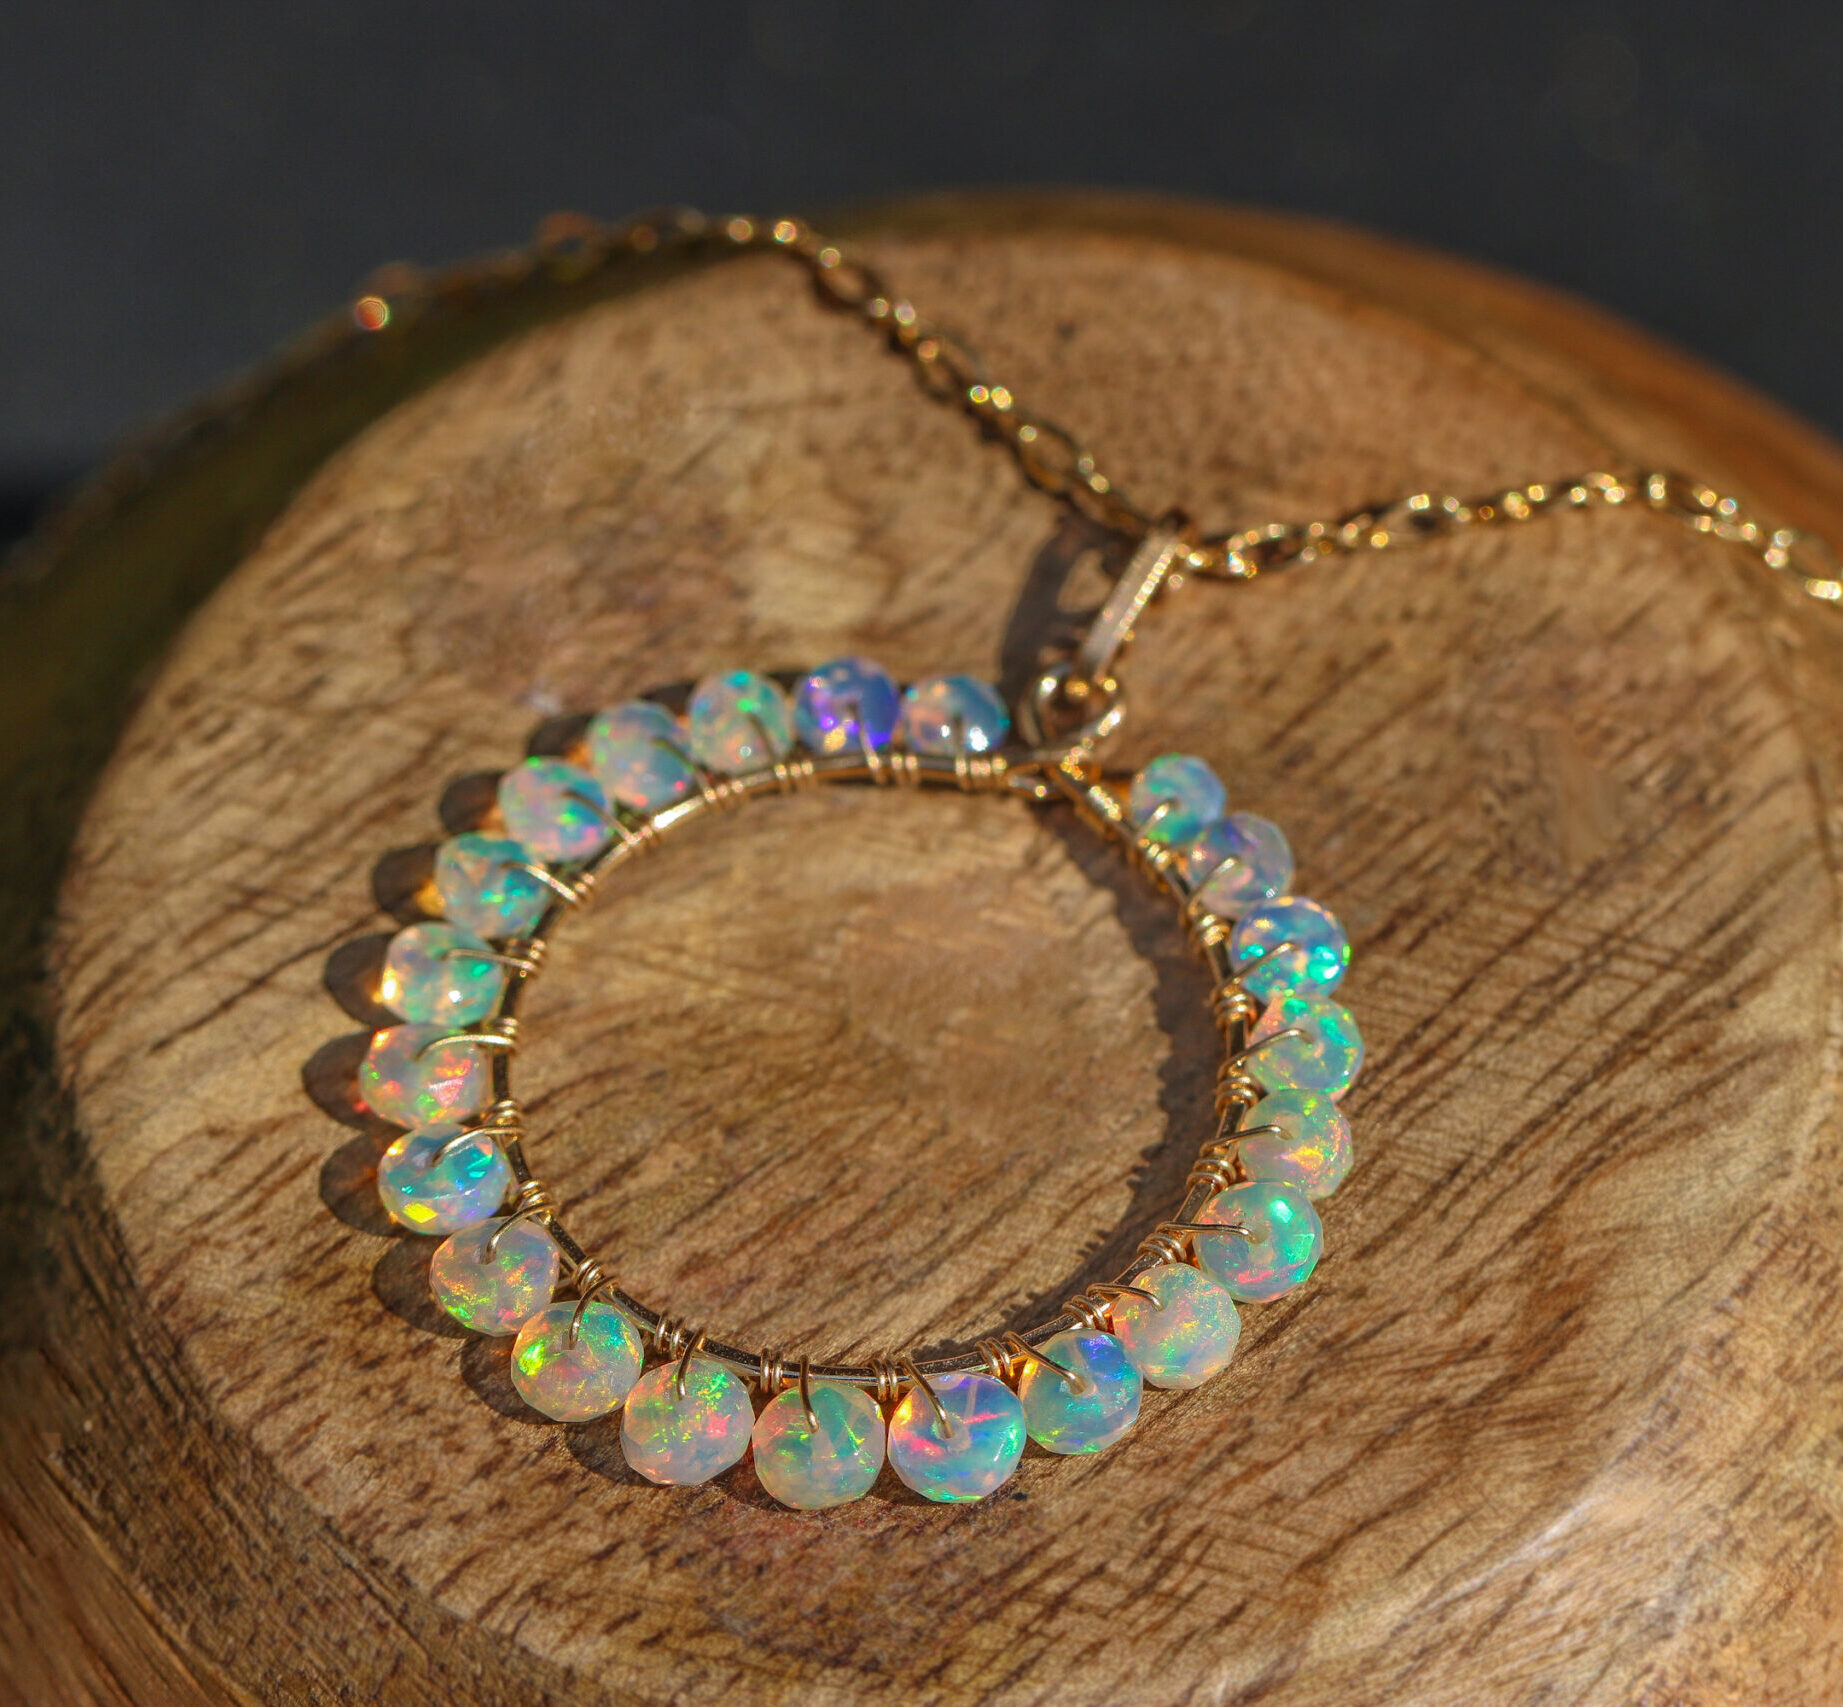 The Elixir Necklace - Ethiopian Welo Opal Wire Wrapped Gemstone Hoop Pendant Necklace